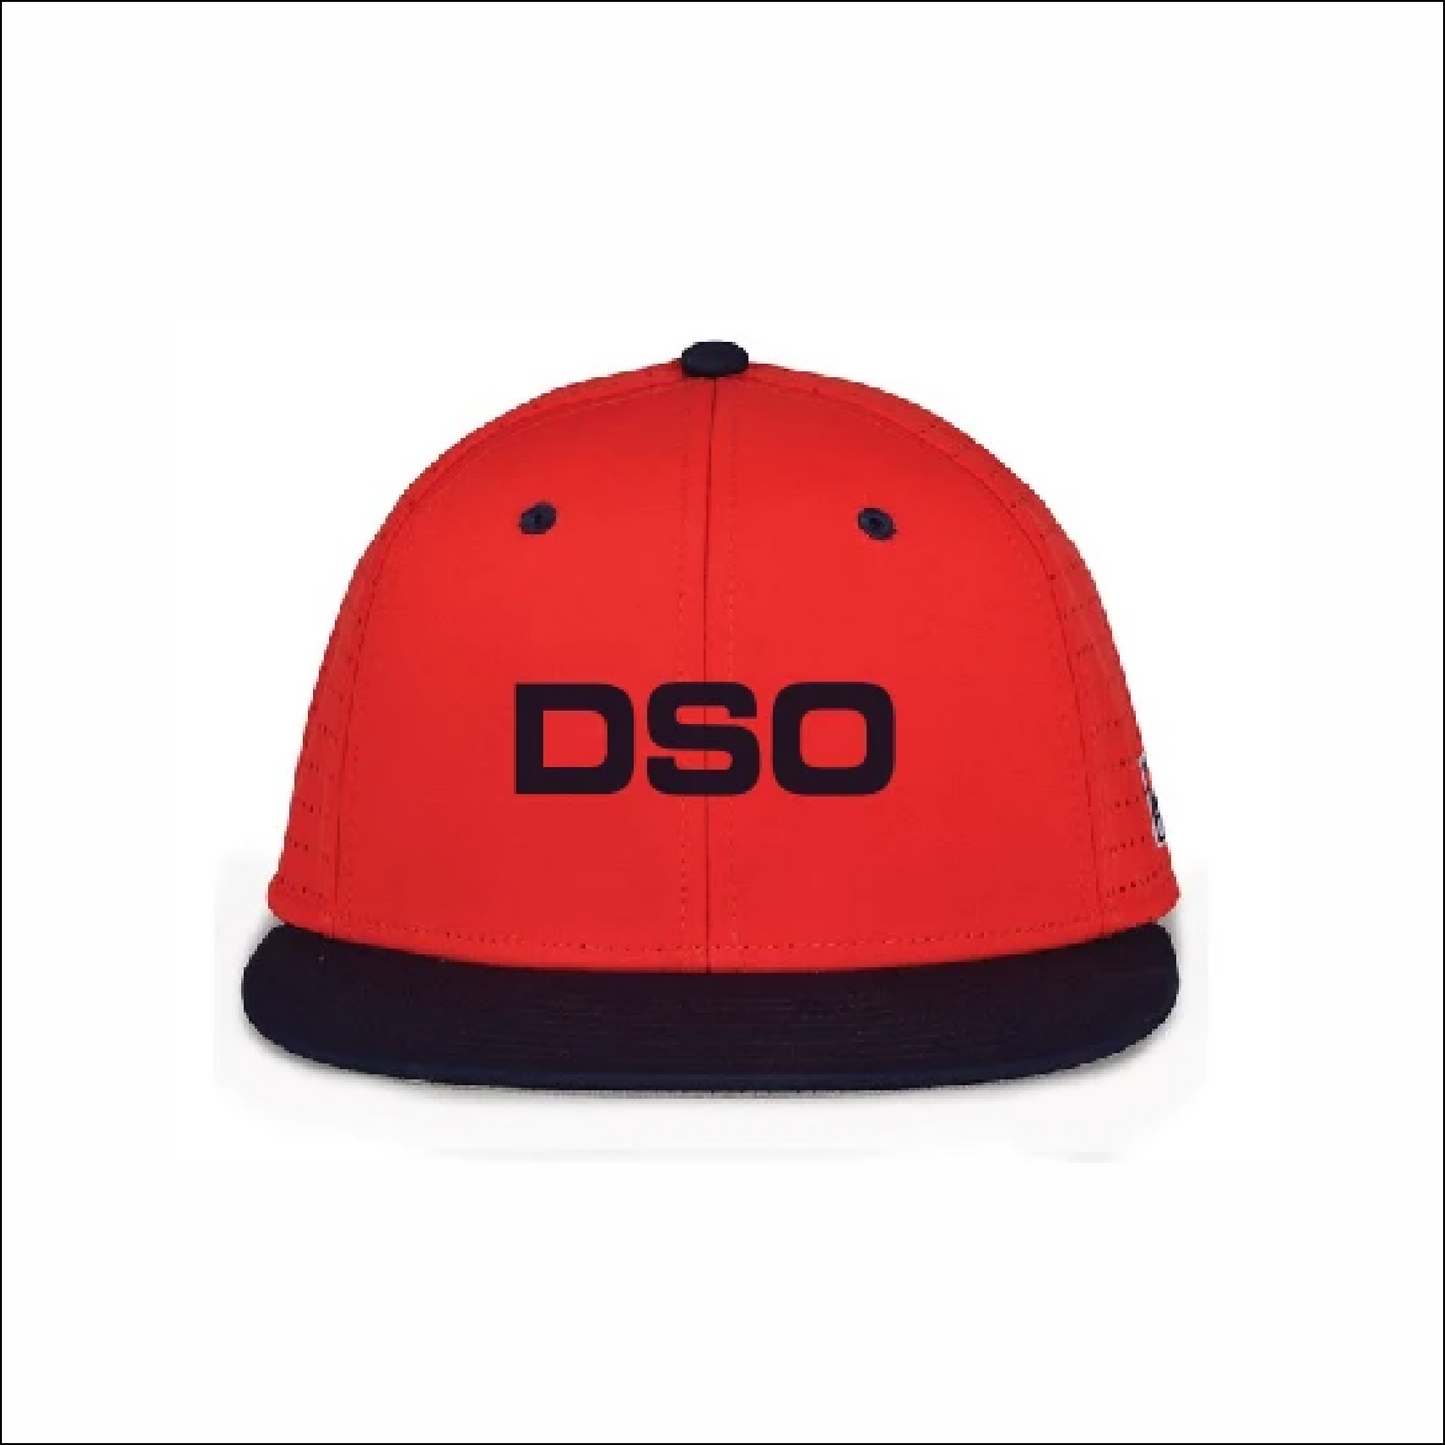 DSO Perforated GameChanger